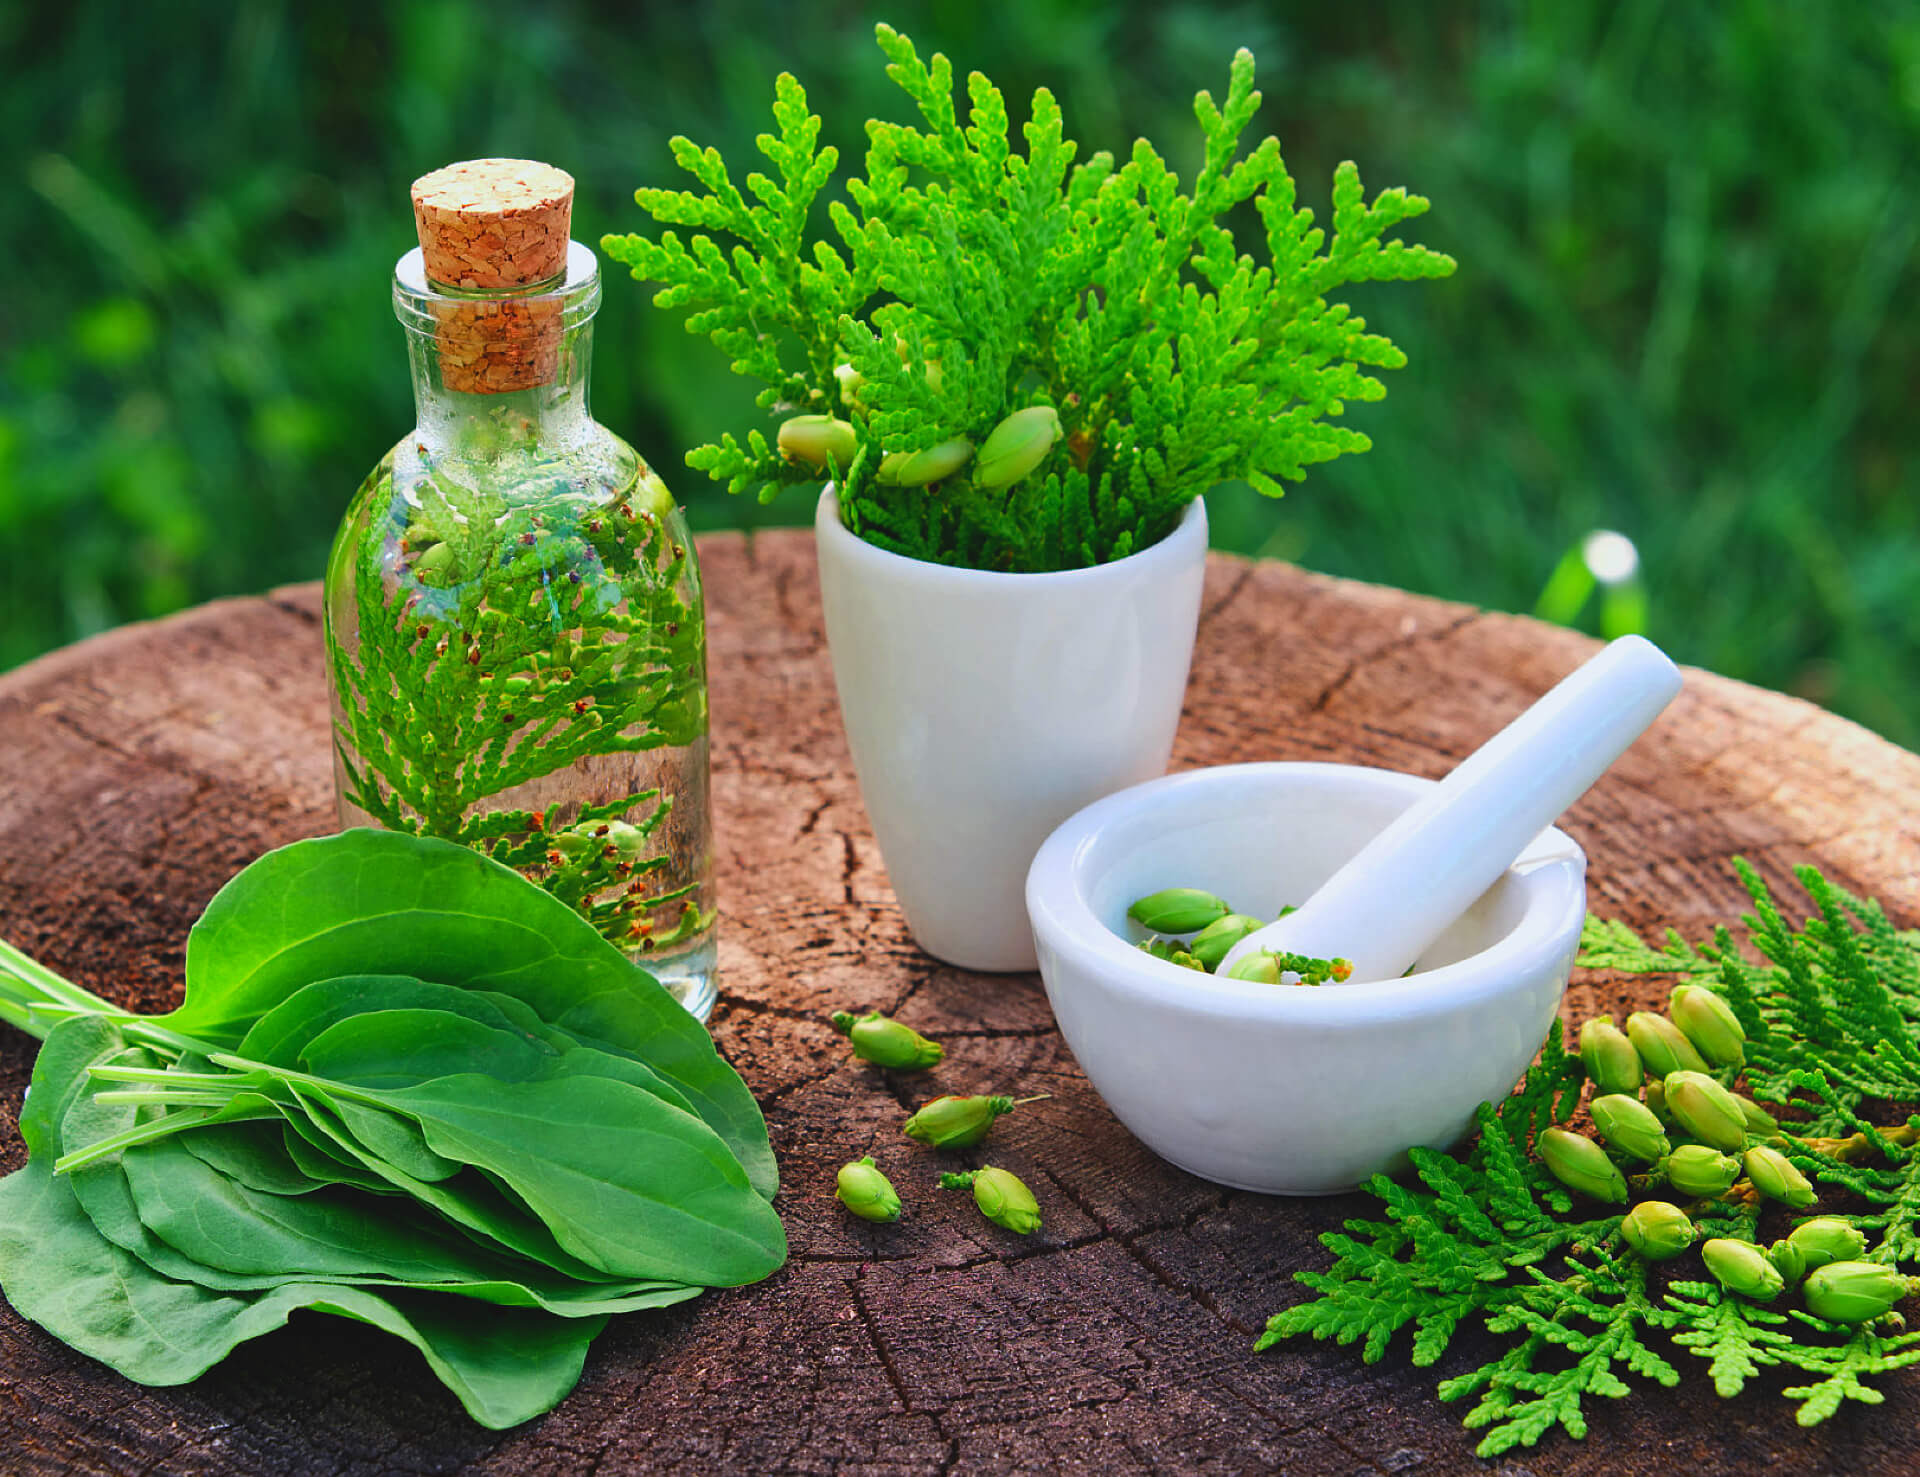 bottle of thuja infusion or oil, mortar and plantain leaves